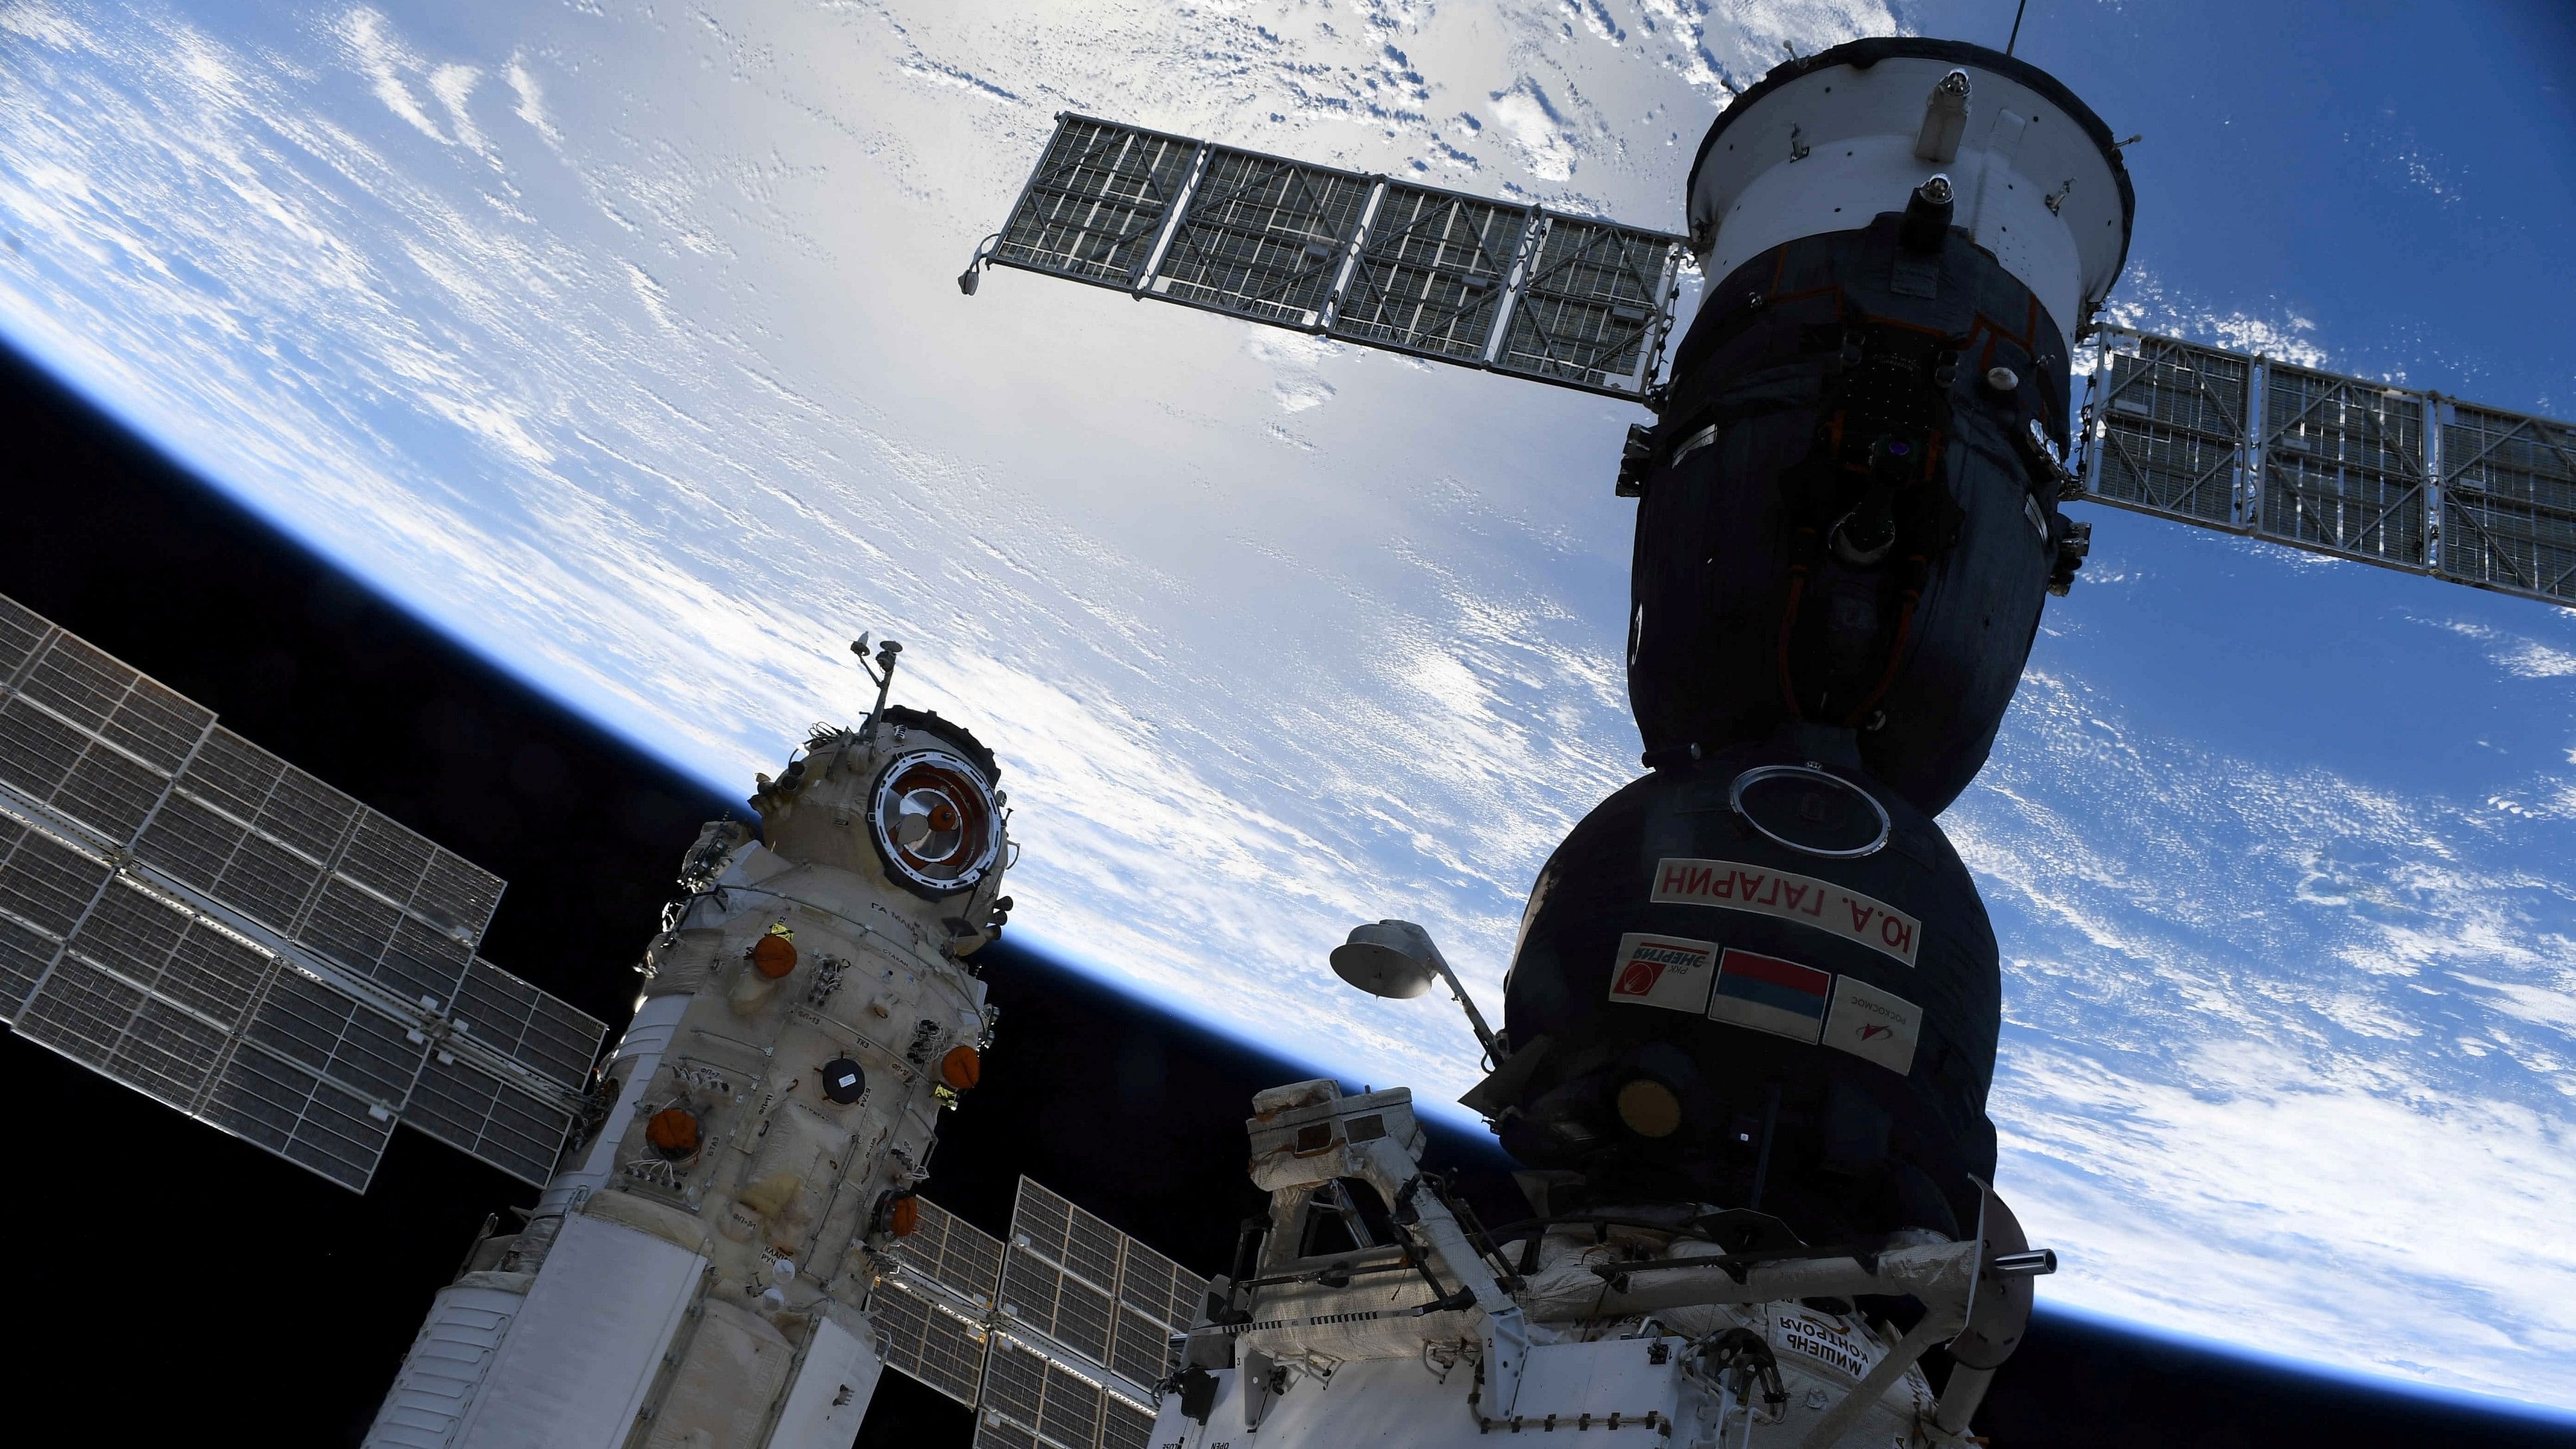 <div class="paragraphs"><p>The Nauka (Science) Multipurpose Laboratory Module is seen docked to the International Space Station (ISS) next to next to Soyuz MS-18 spacecraft on July 29, 2021.</p></div>